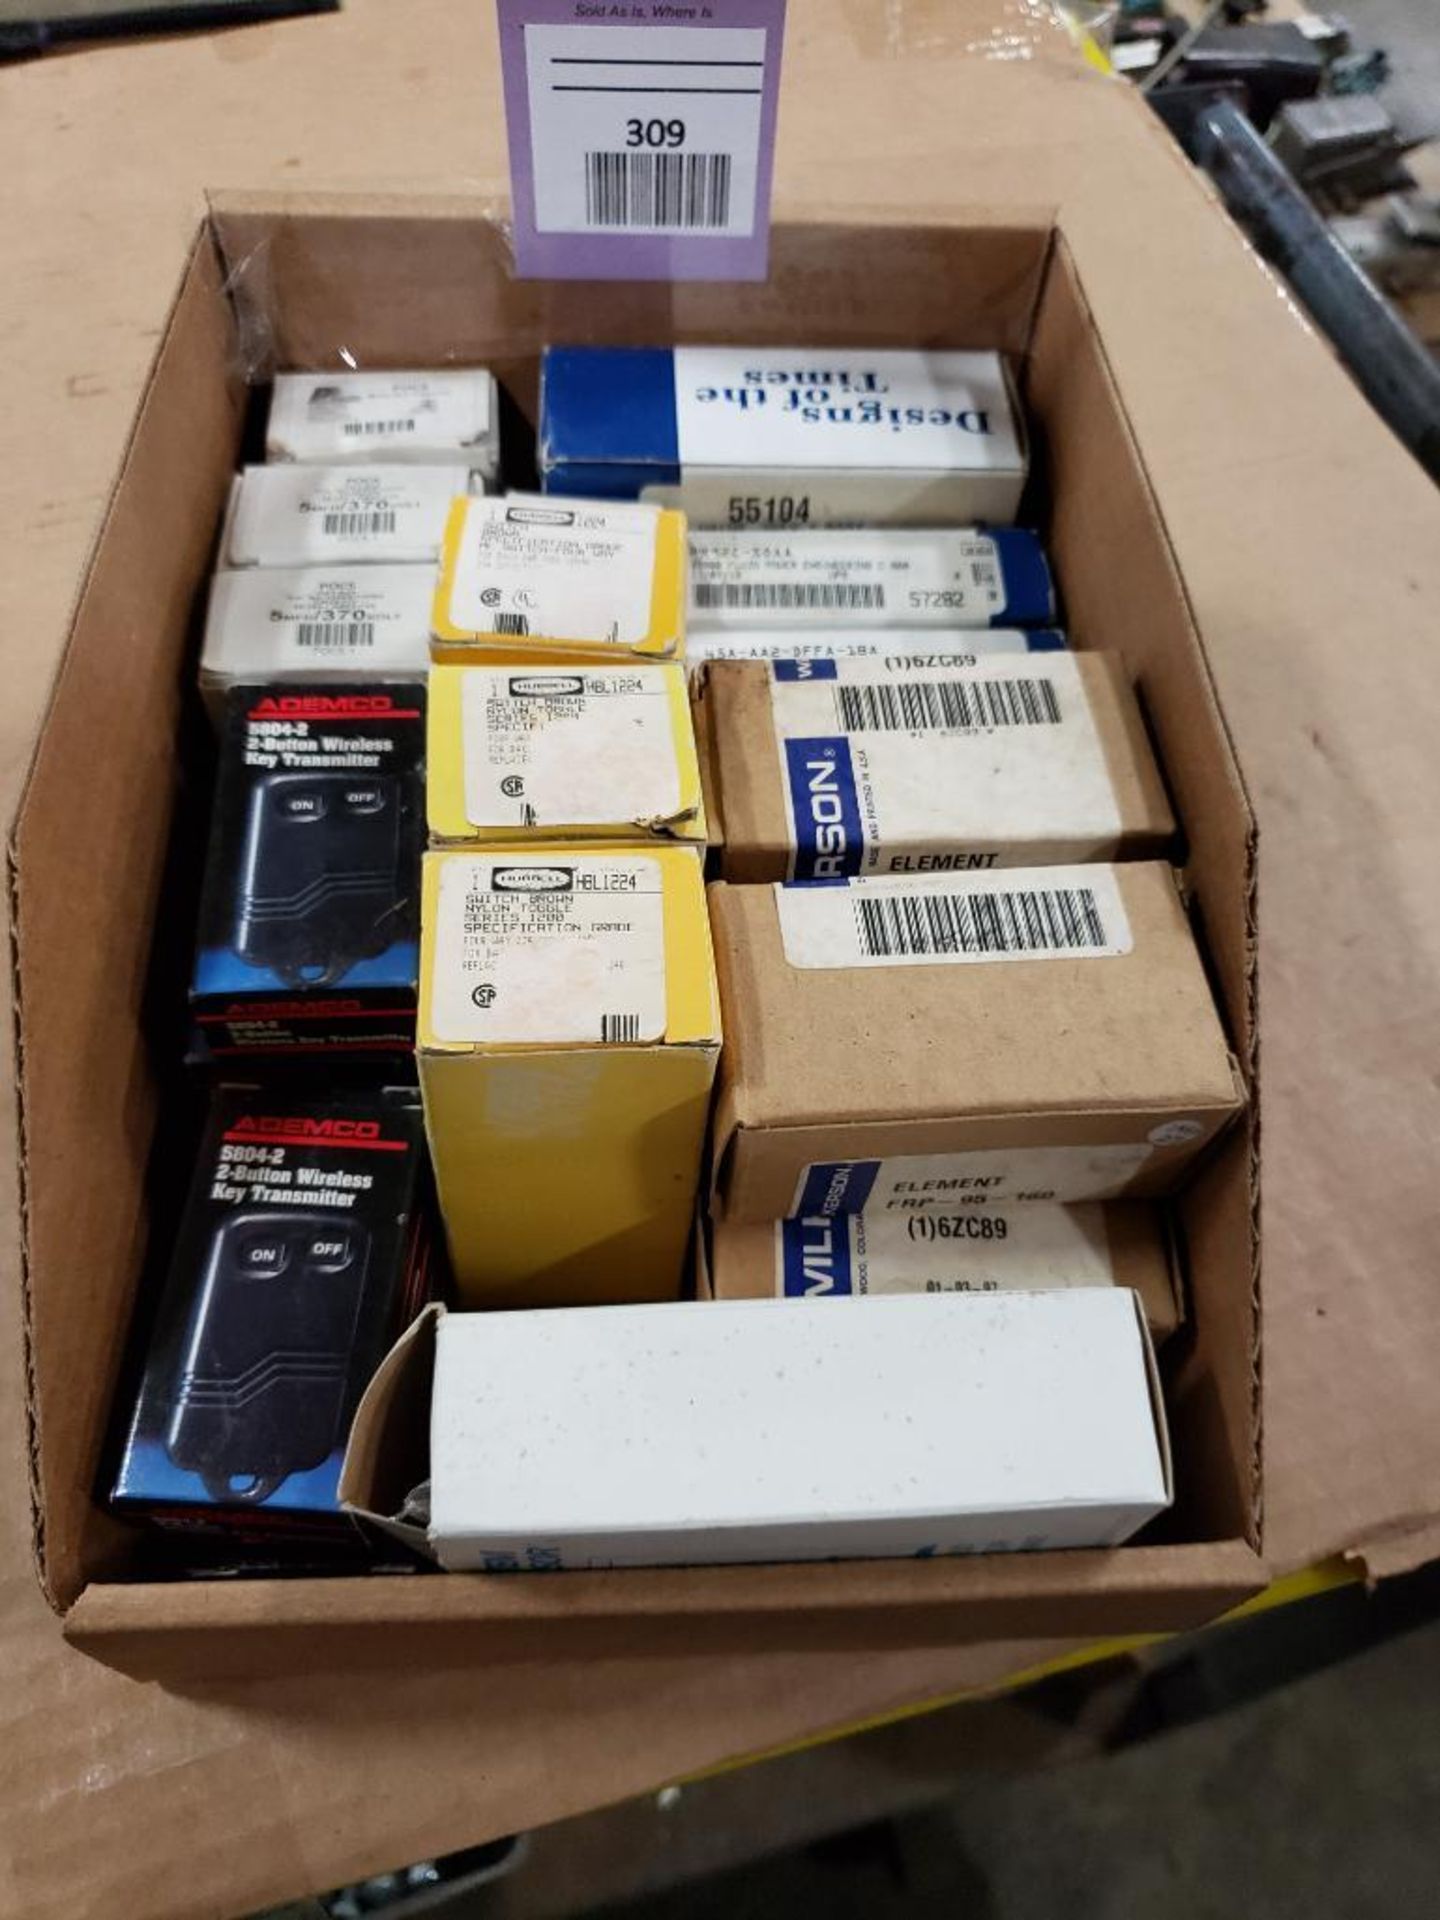 Assorted replacement parts. Wilkerson, Hubbell, Aemco. New in box.